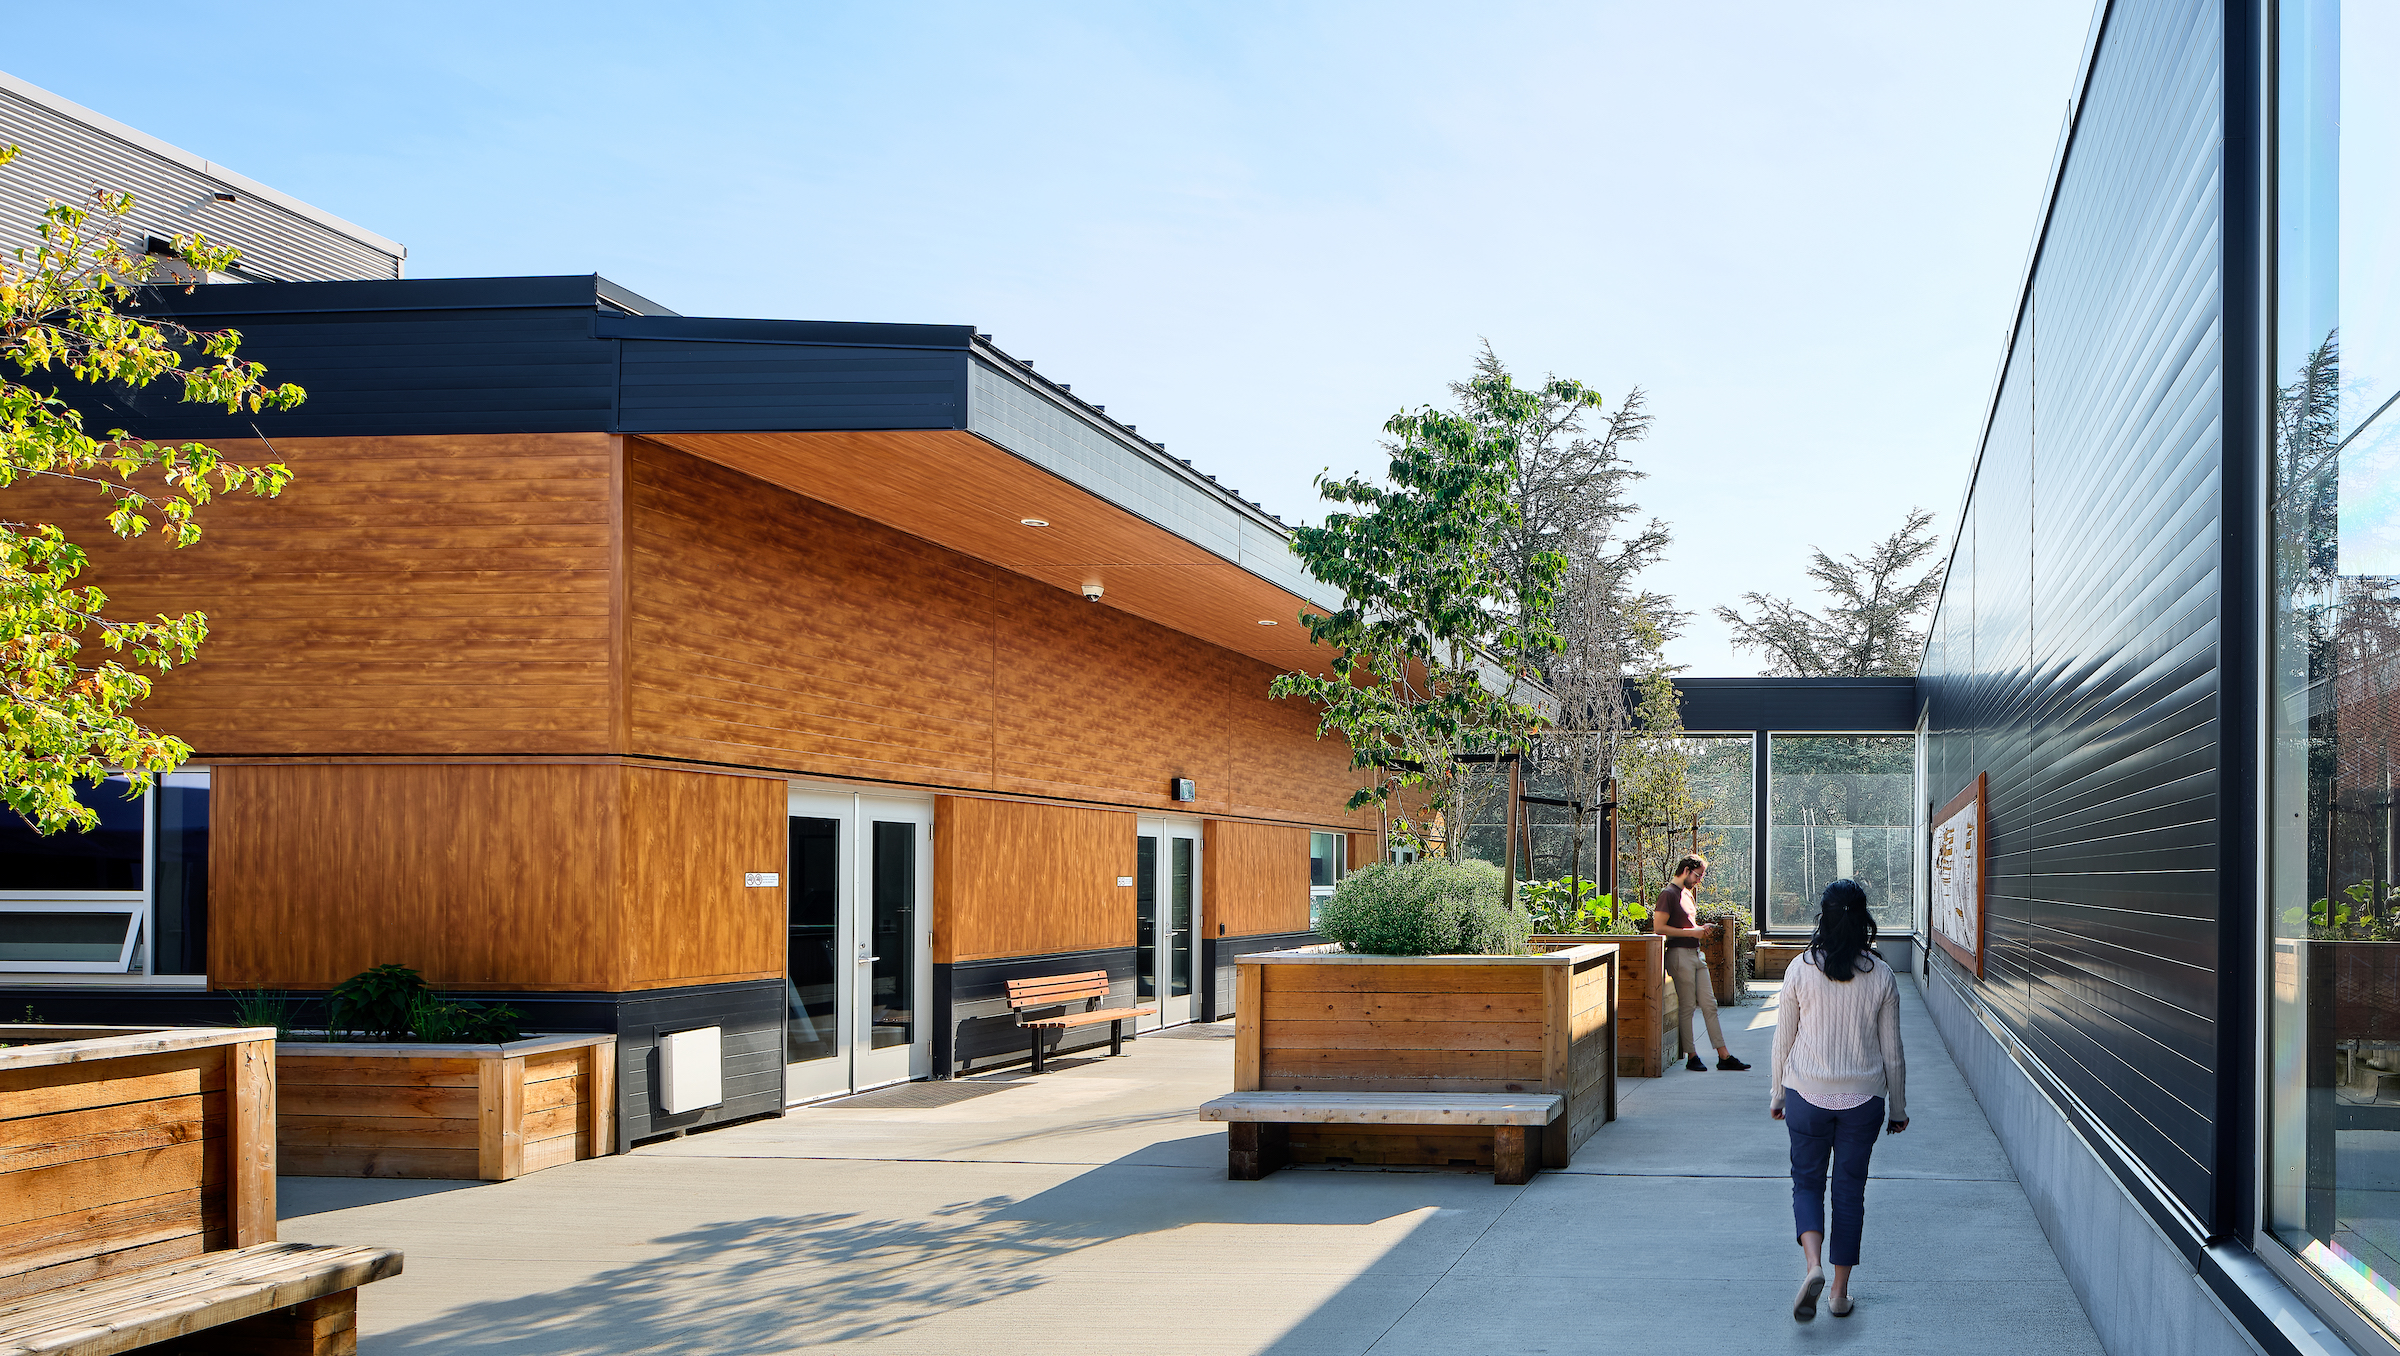 The 108,000-sf Healing Spirit House in Coquitlam, B.C., designed by HDR and built by PCL Constructors